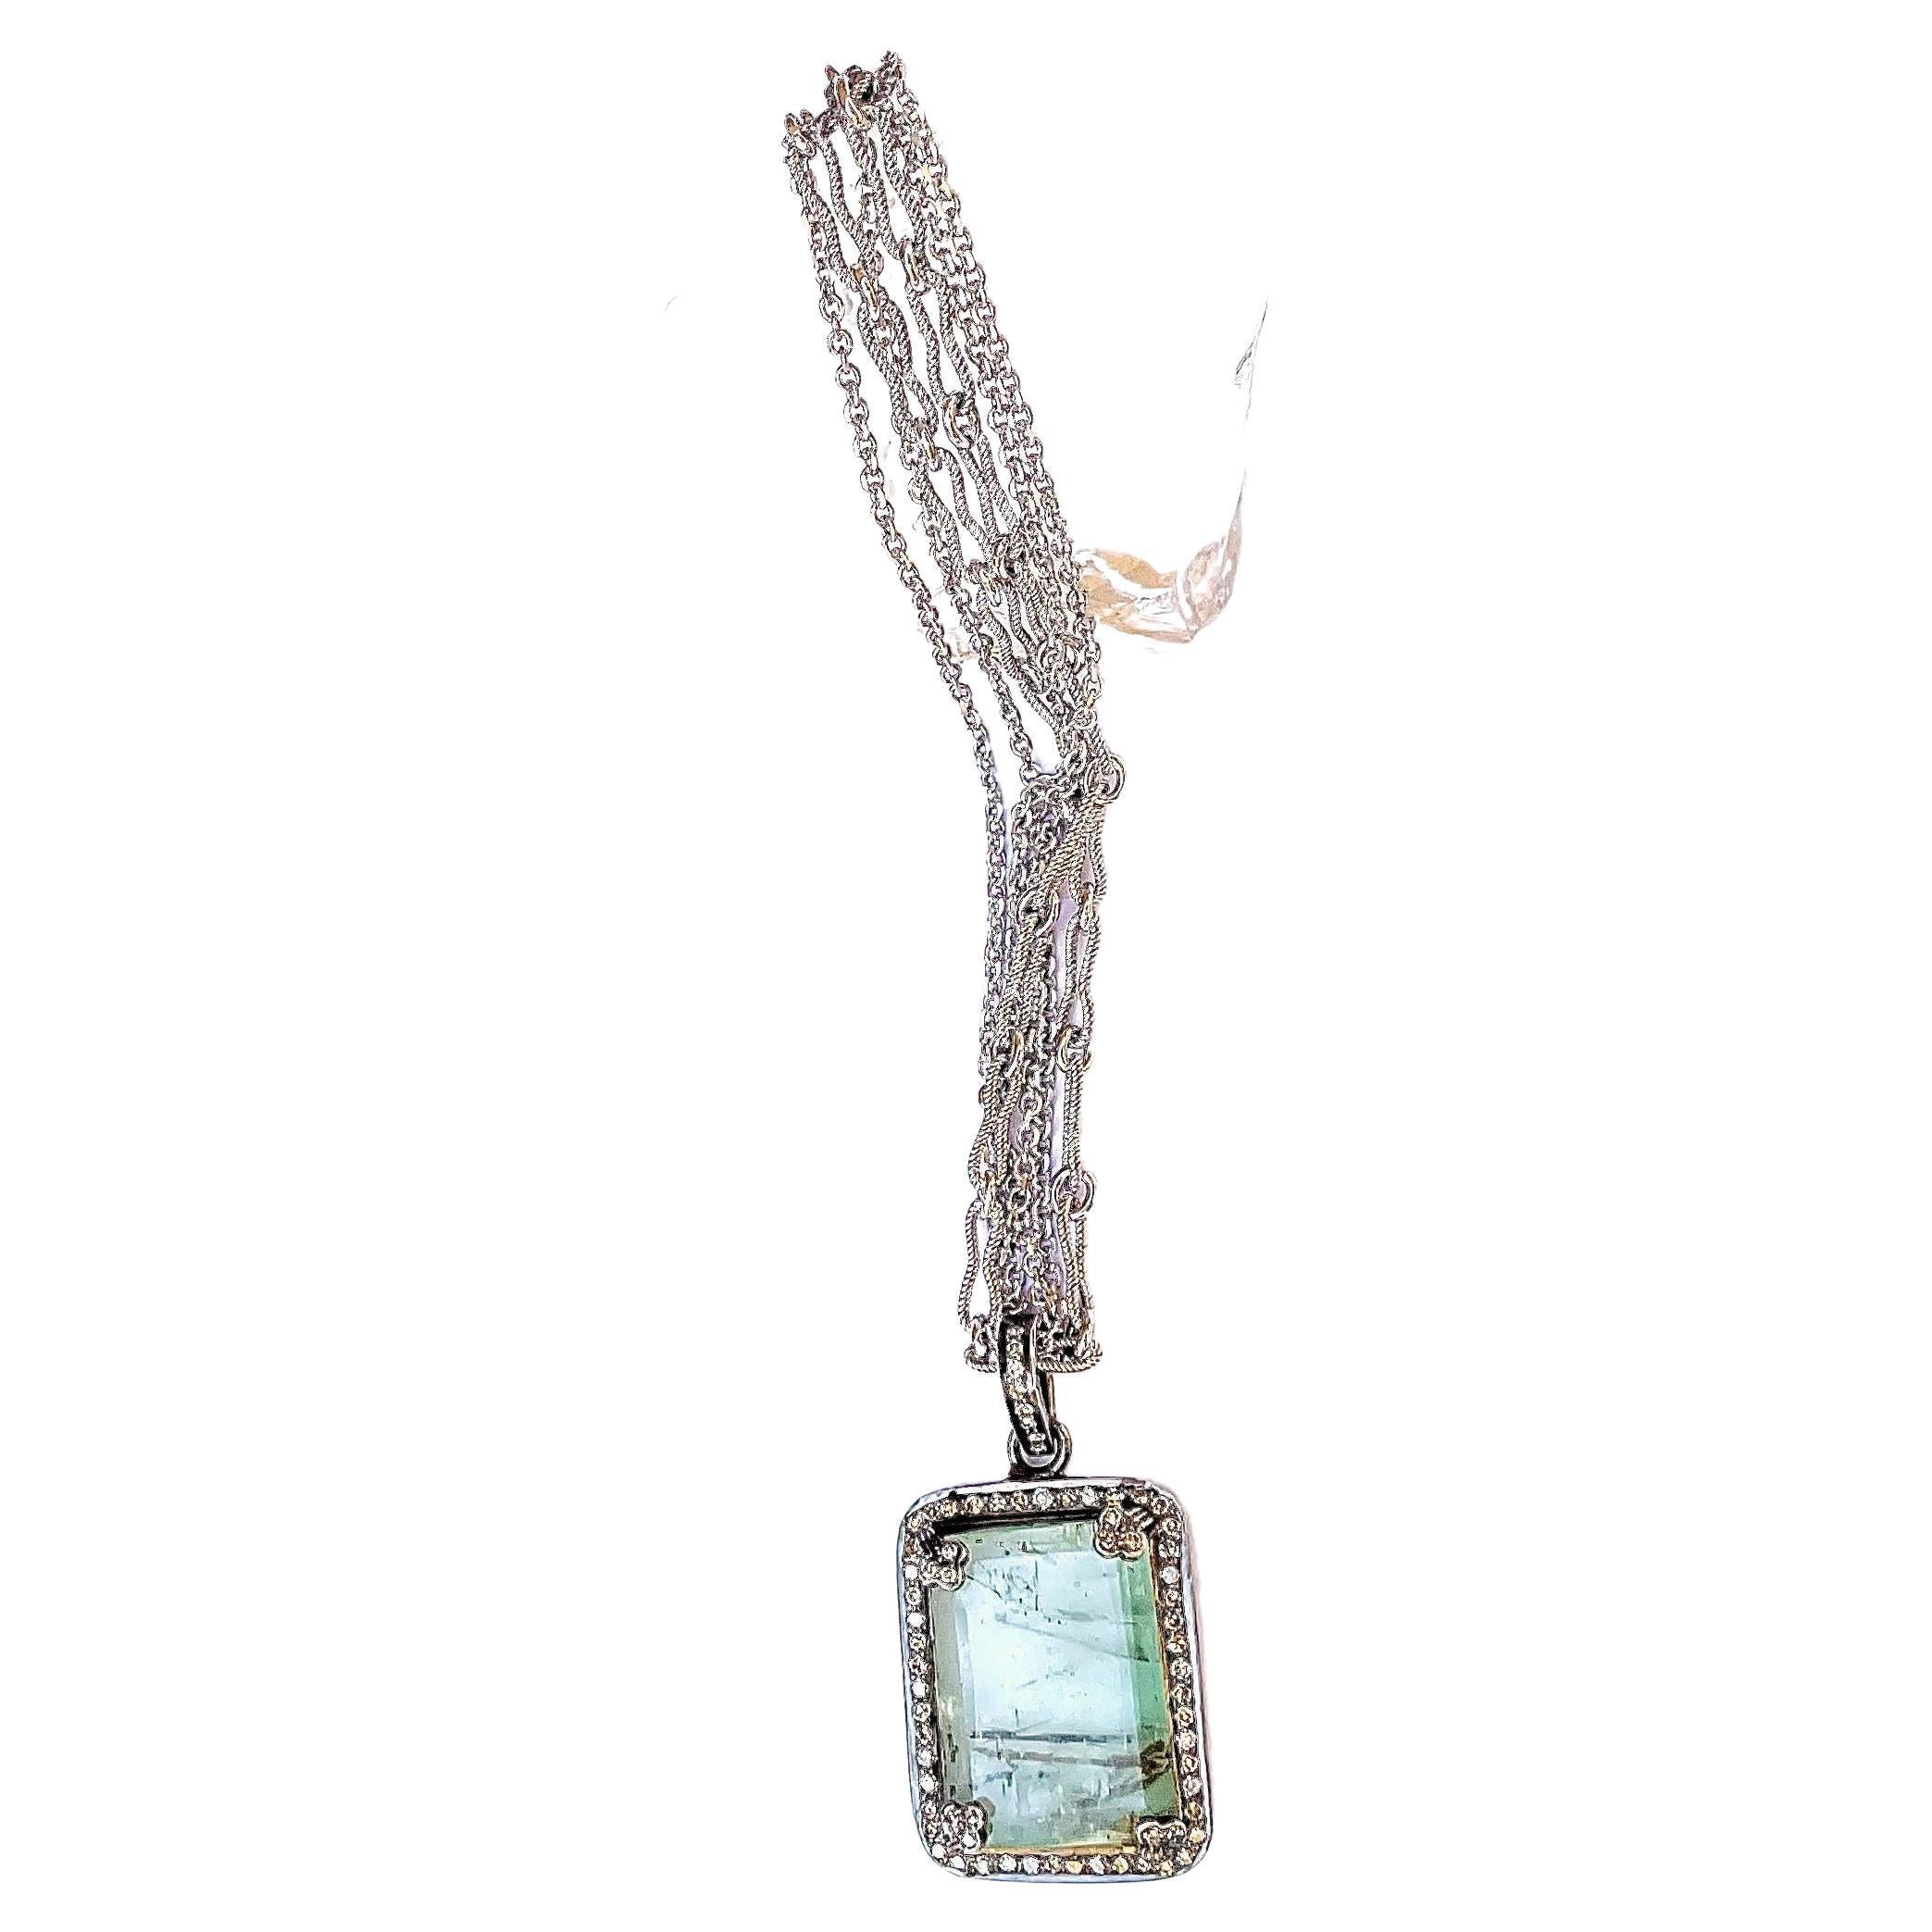 Description
Lovely with character, Russian Emerald and pave diamond pendant necklace suspended from a triple chain.
Item # N3681

Materials and Weight
Emerald, 24 x 19mm, rectangle cut, 6.9 carats.
Pave diamonds, .50 carats.
Pendant, 34 mm.
Pendant,